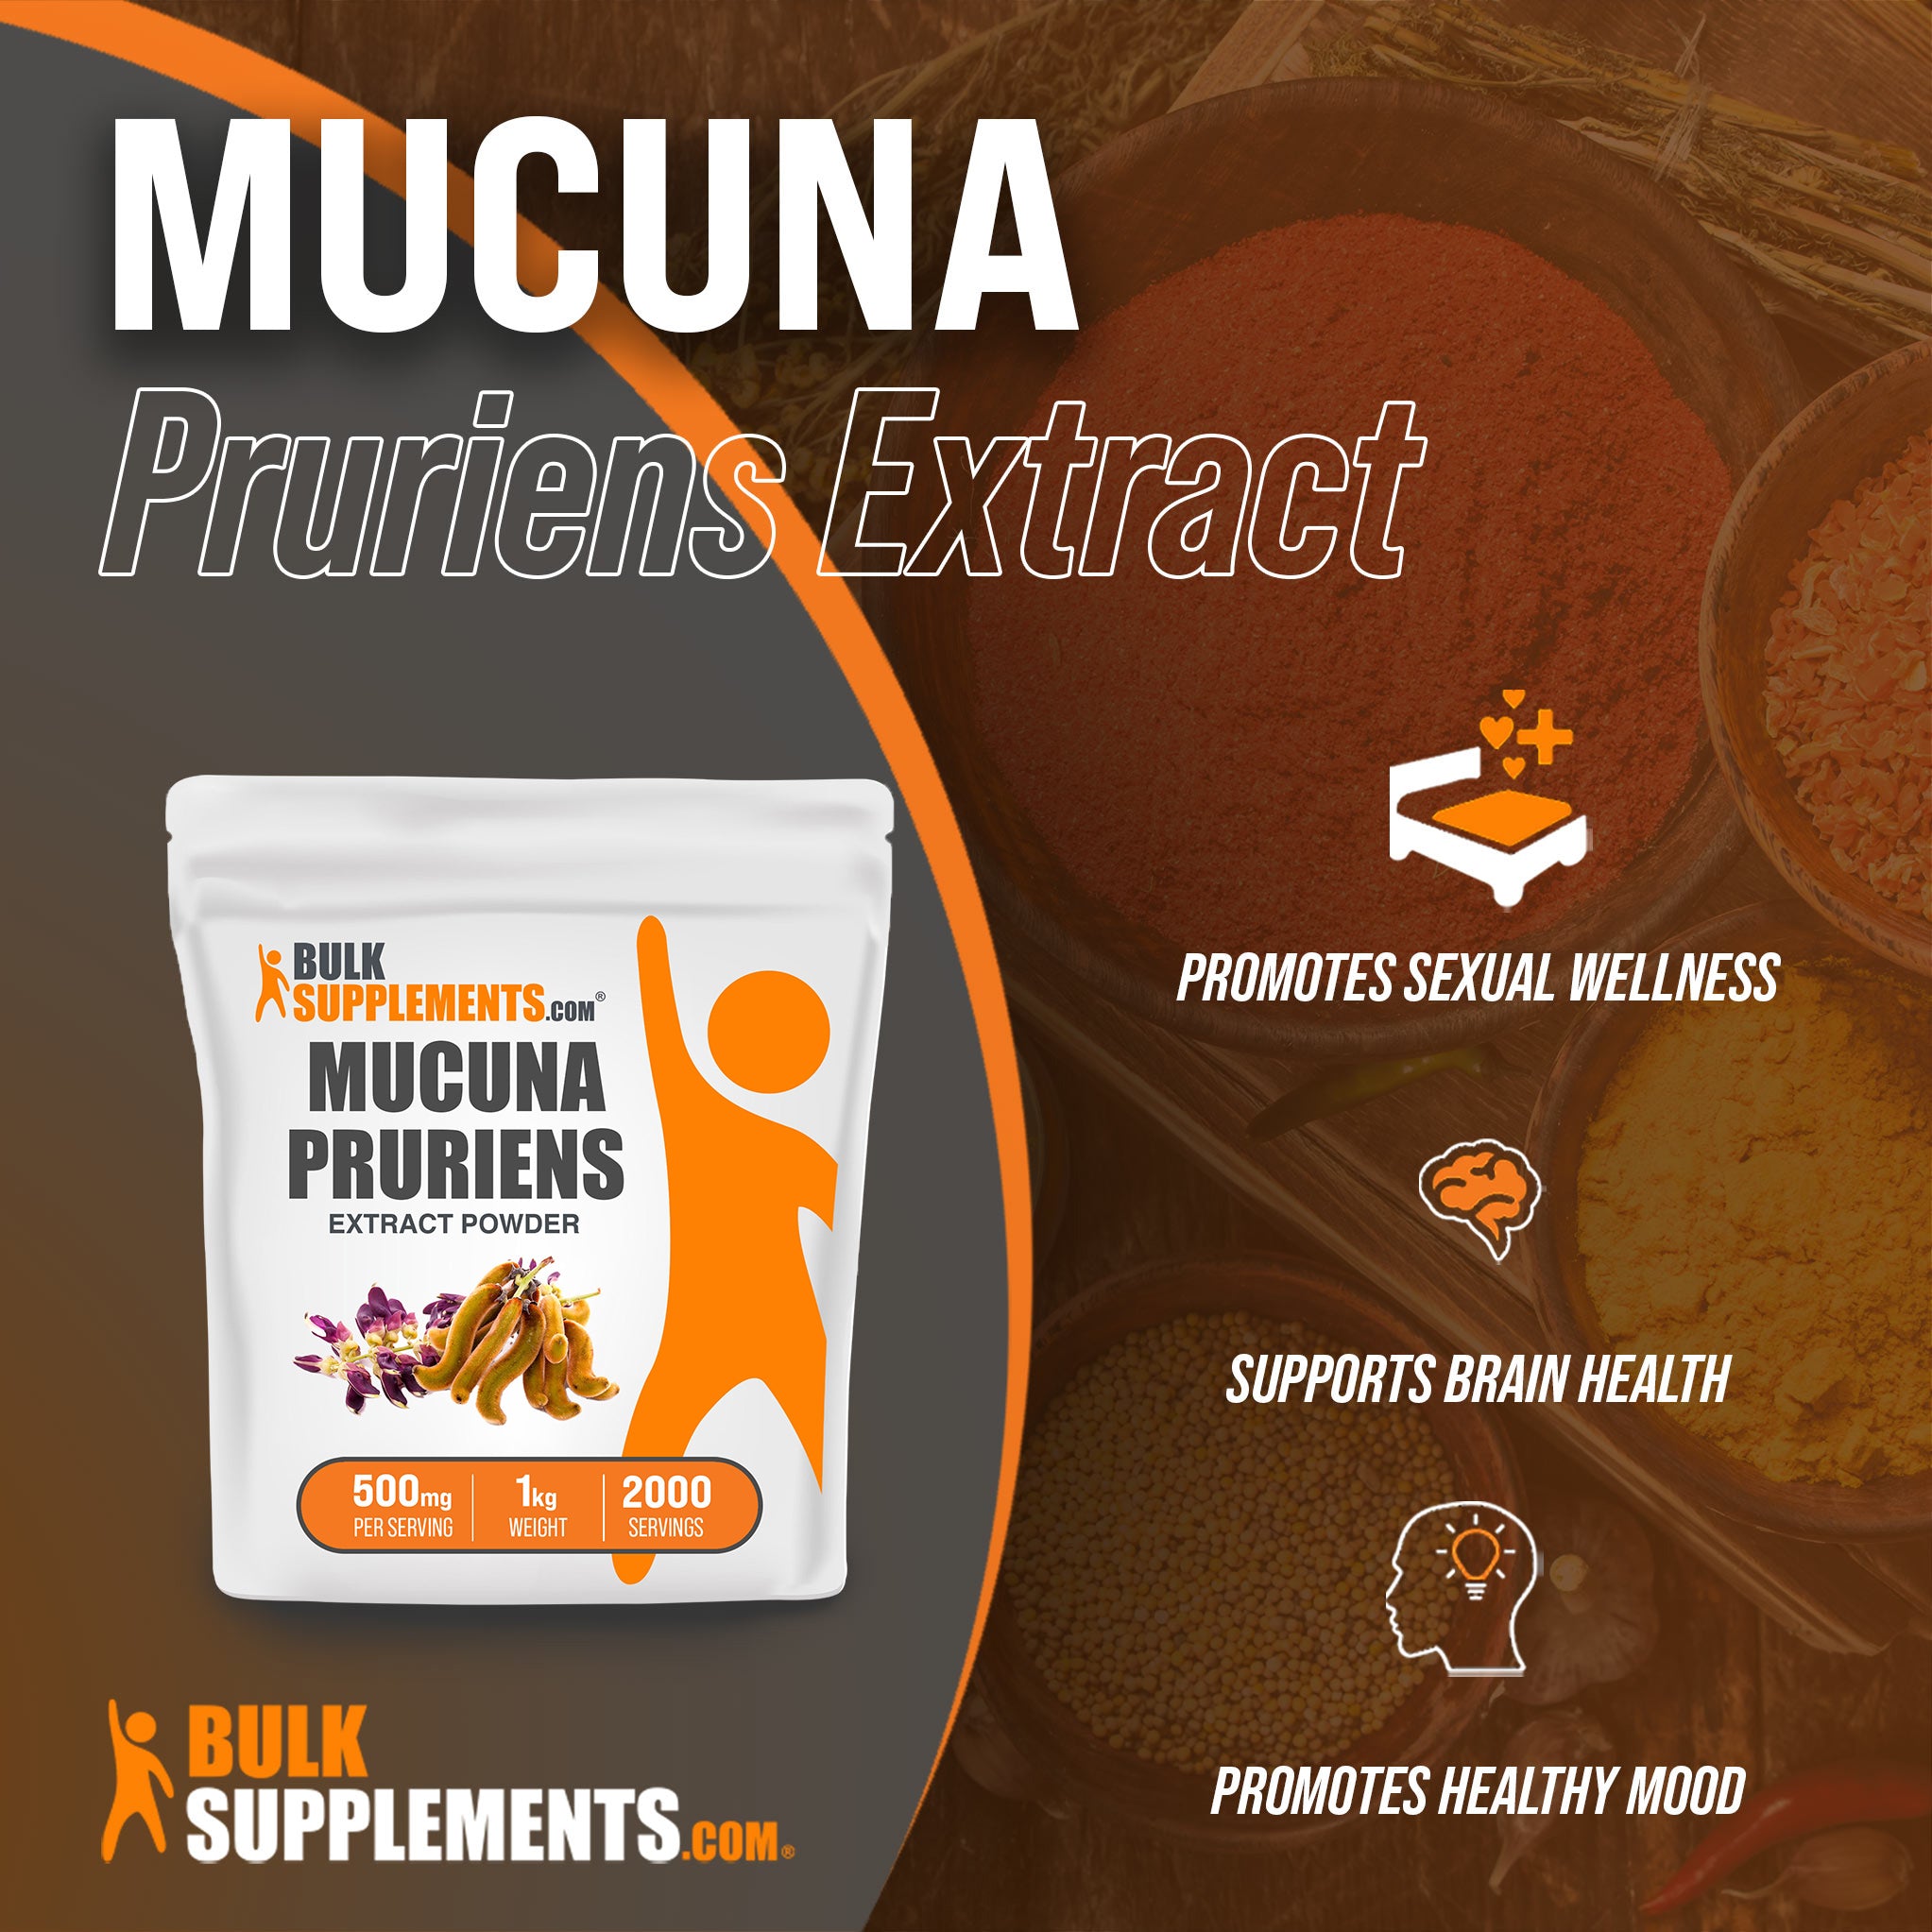 Benefits of Mucuna Pruriens Extract: promotes sexual wellness, supports brain health, promotes healthy mood